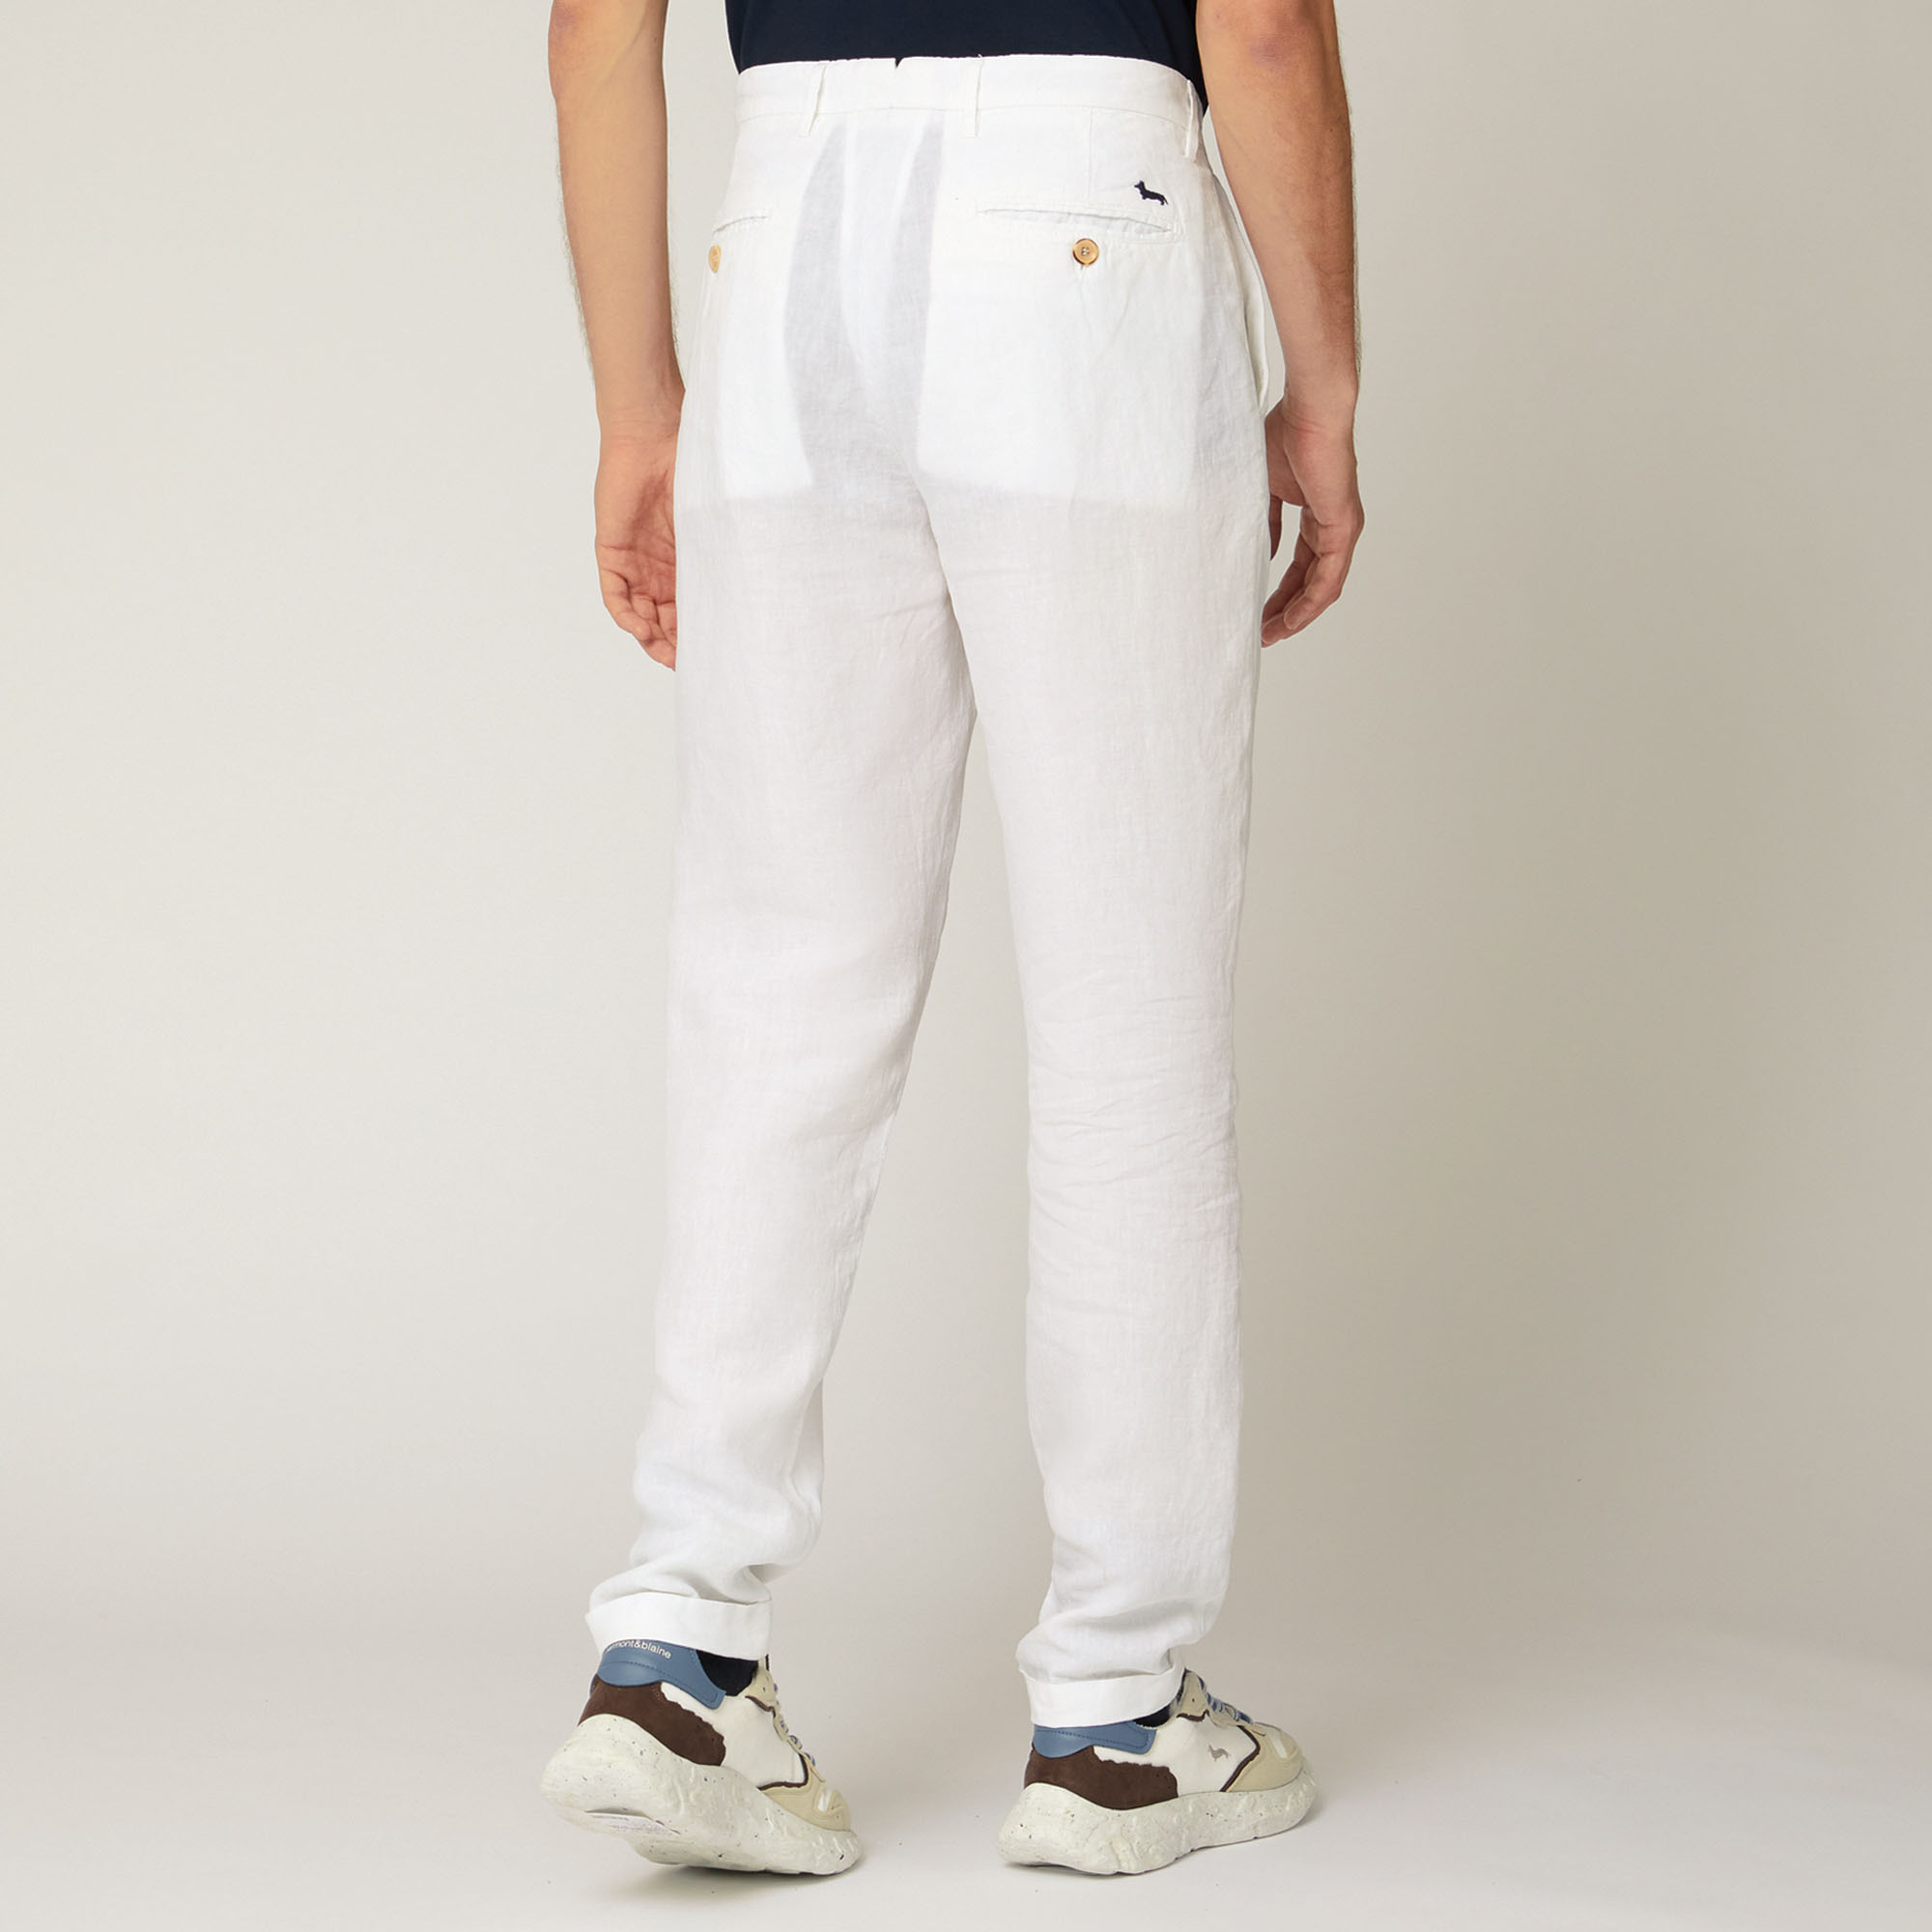 Linen Pants, White, large image number 1